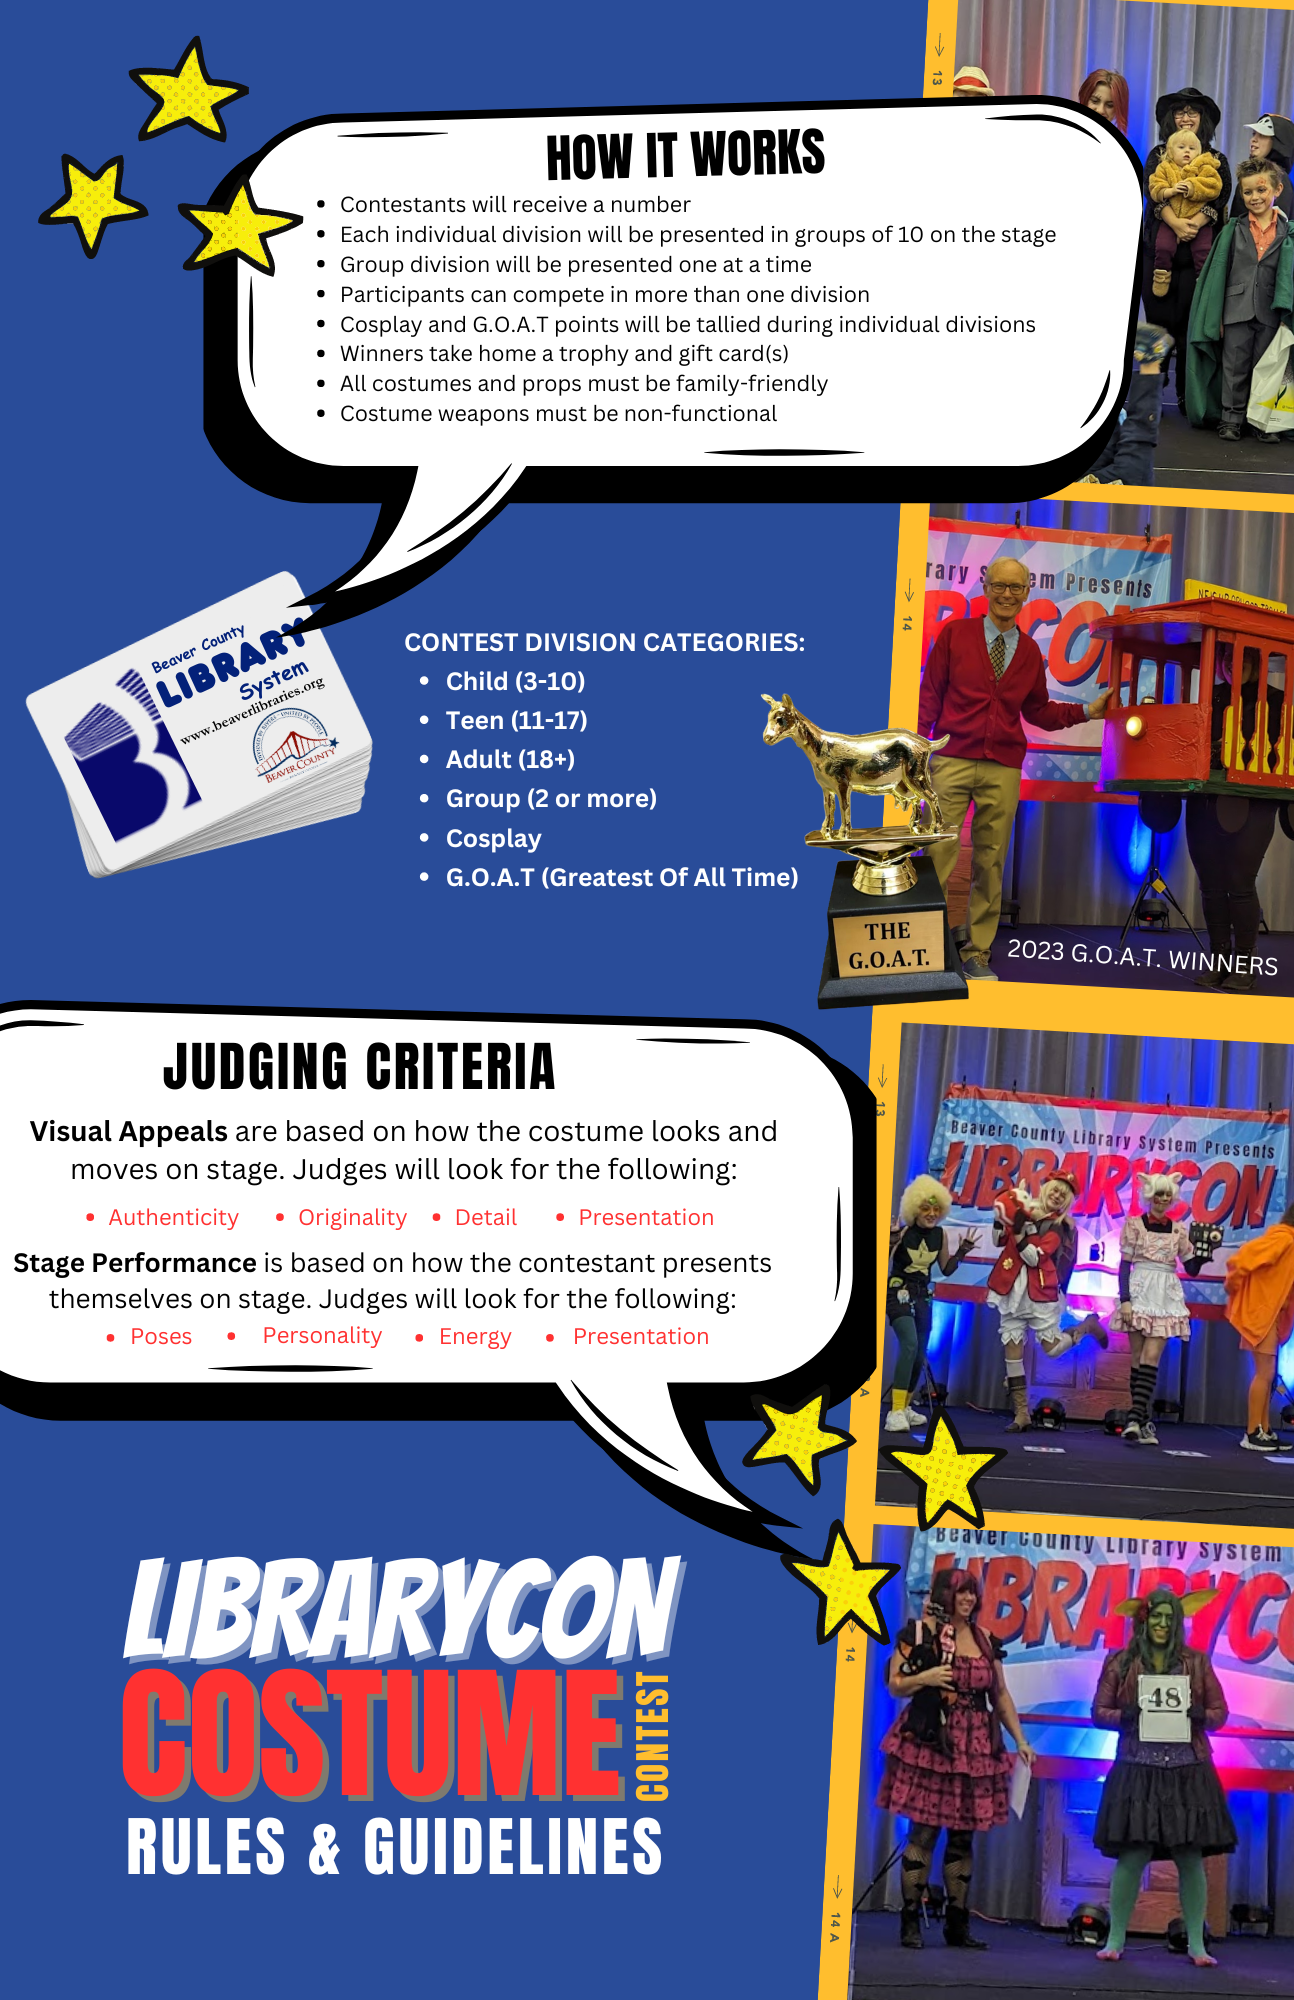 LibraryCON costume contest rules and guidelines